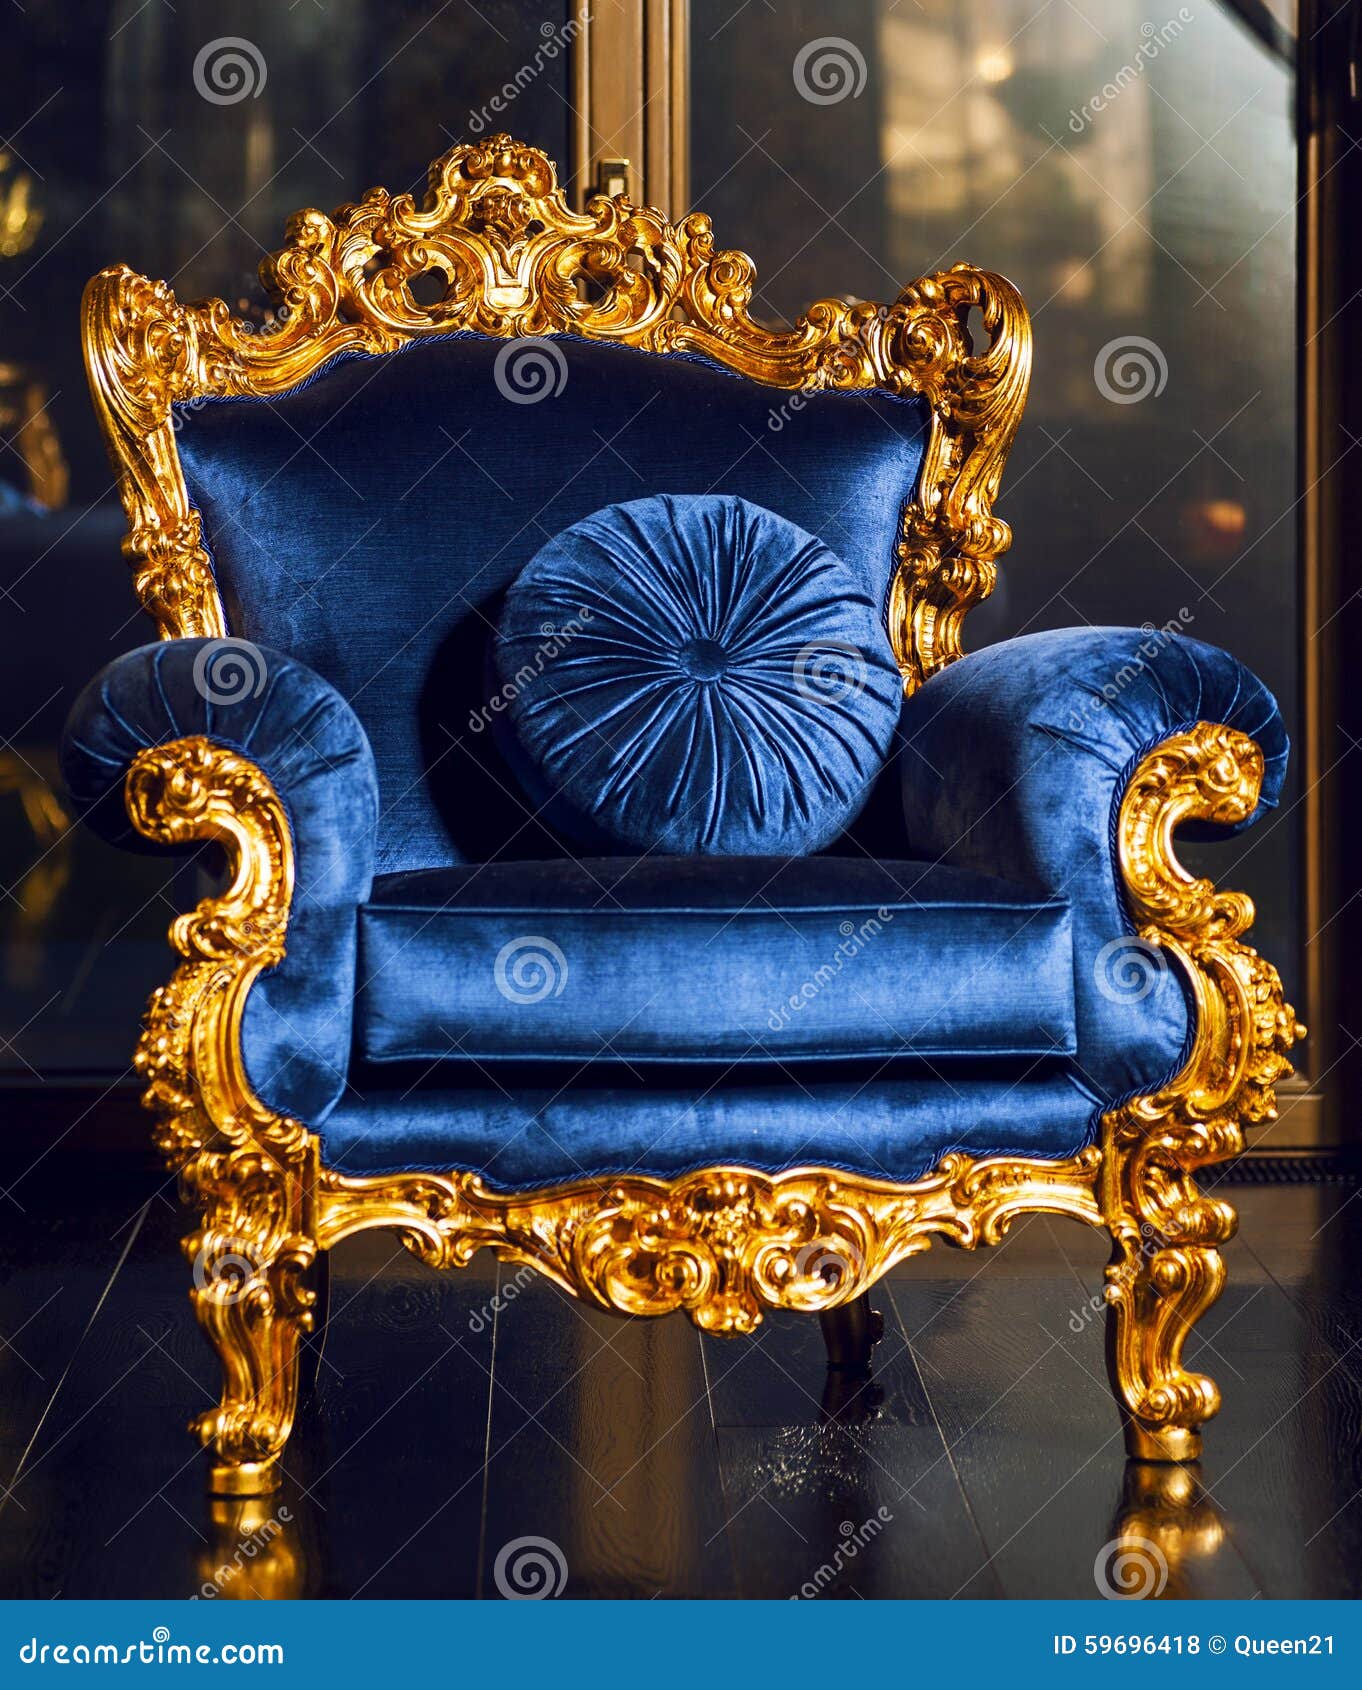 Classical Blue Royal Sofa on Luxurious Interior Stock Photo - Image of  isolated, knob: 59696418